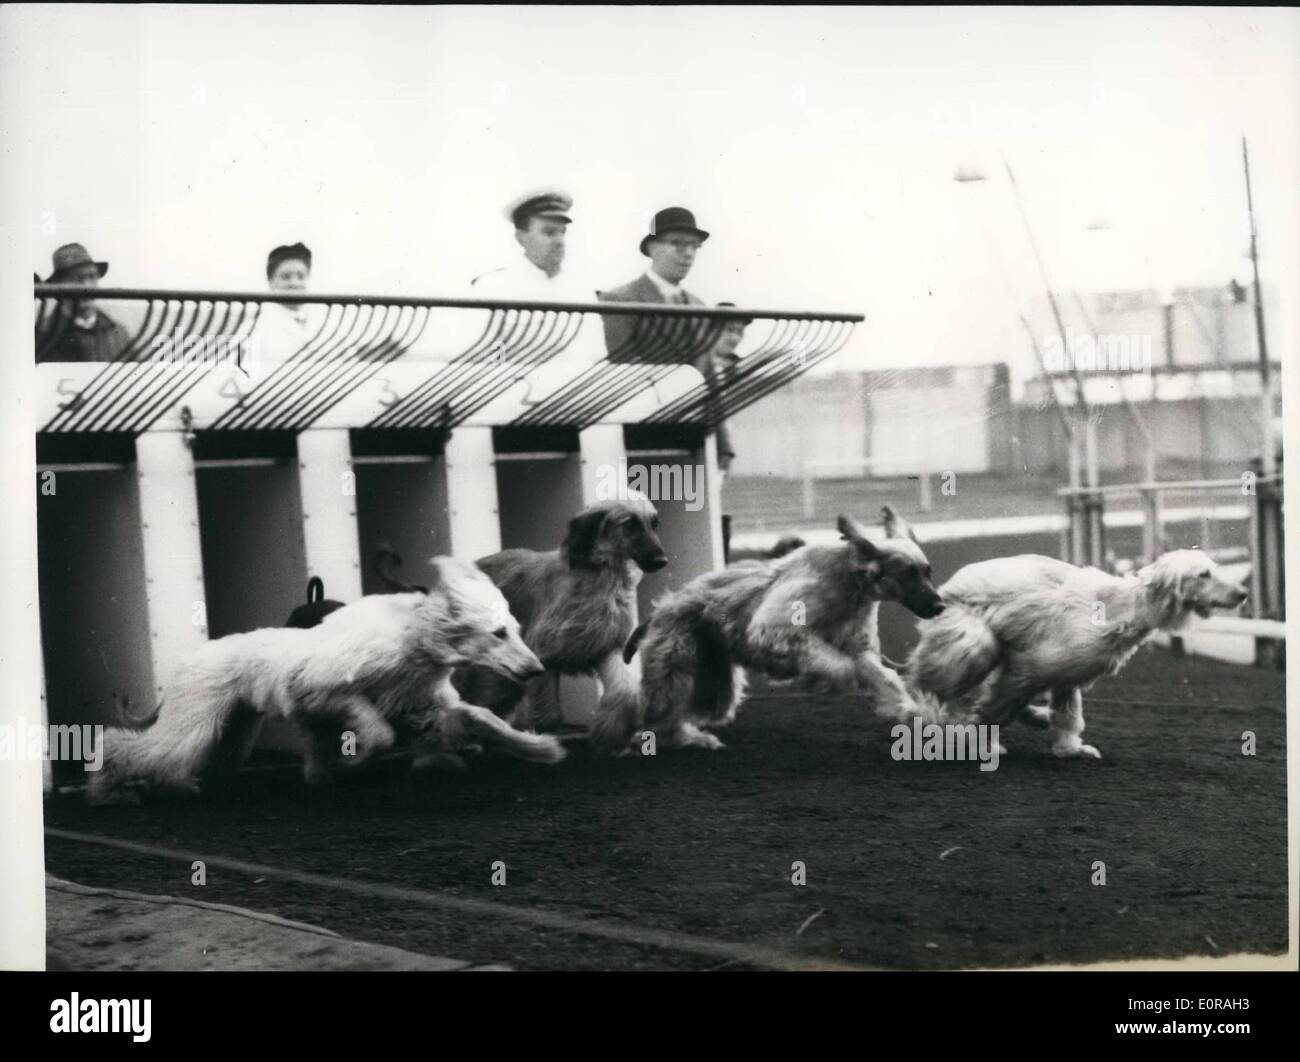 Nov. 11, 1958 - Afghan Hound Trials at New Cross Stadium: Afghan hounds owned by Mrs Jean Briggs were to be seen being ''schooled'' at New Cross Stadium this morning behind the electric hare. Mrs Briggs has been given participation to train the dogt New Cross. They are in the early stages of training Greyhounds or competing in a Greyhound meeting. They could ater chase the dummy hare and they may be used in a ''Cavalcade of Speed'' demonstration. Photo shows some of the Afghan Hounds leaves the boxes at star of their trails this morning. Stock Photo